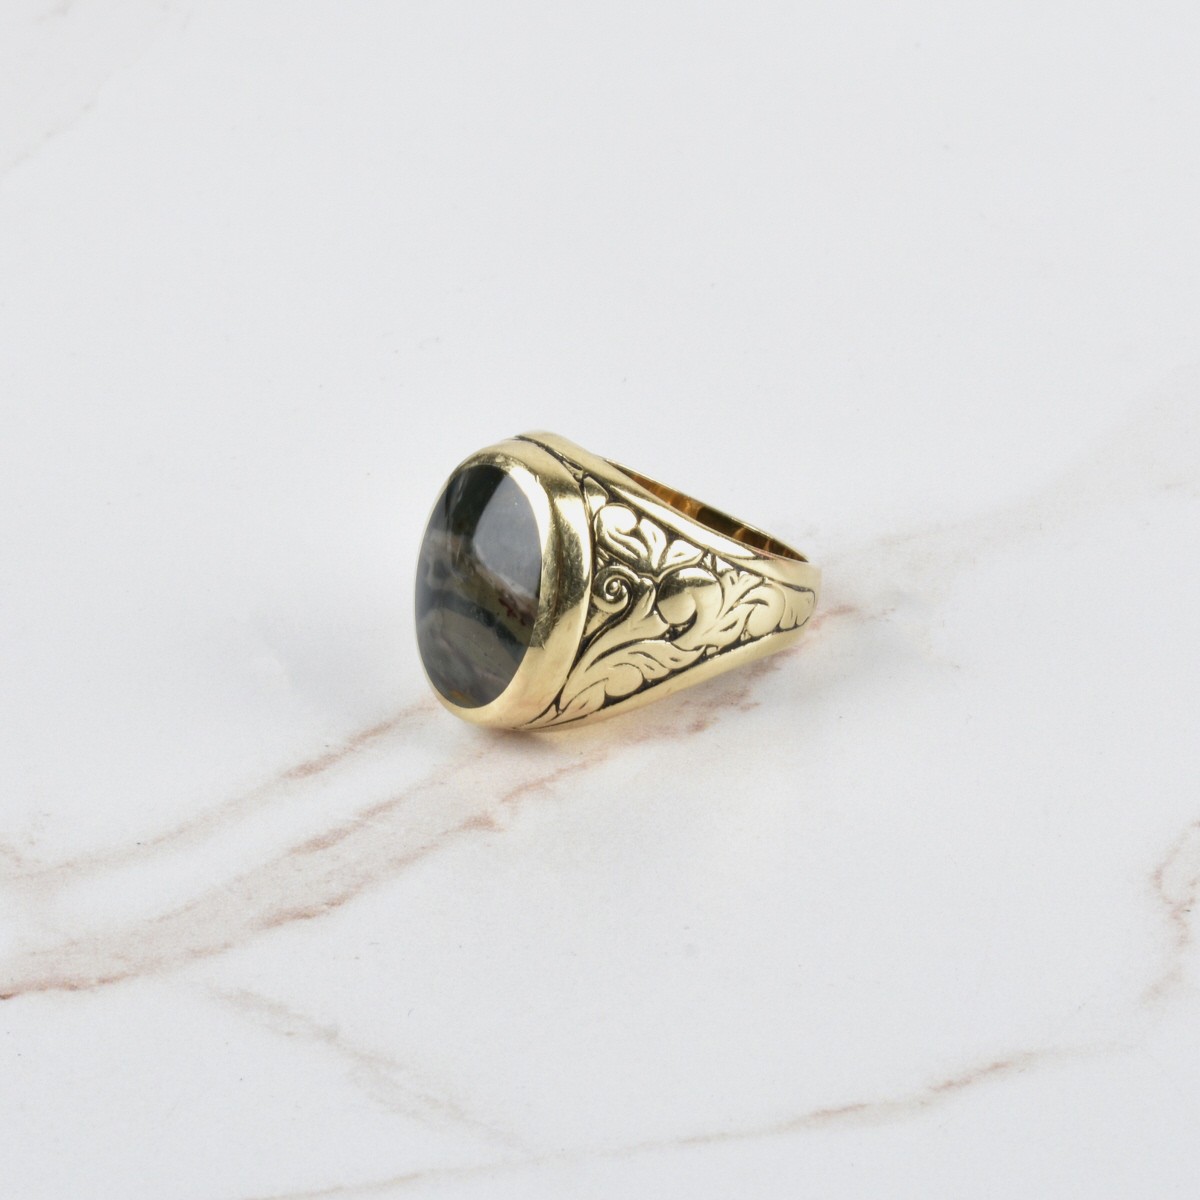 Agate and 14K Ring